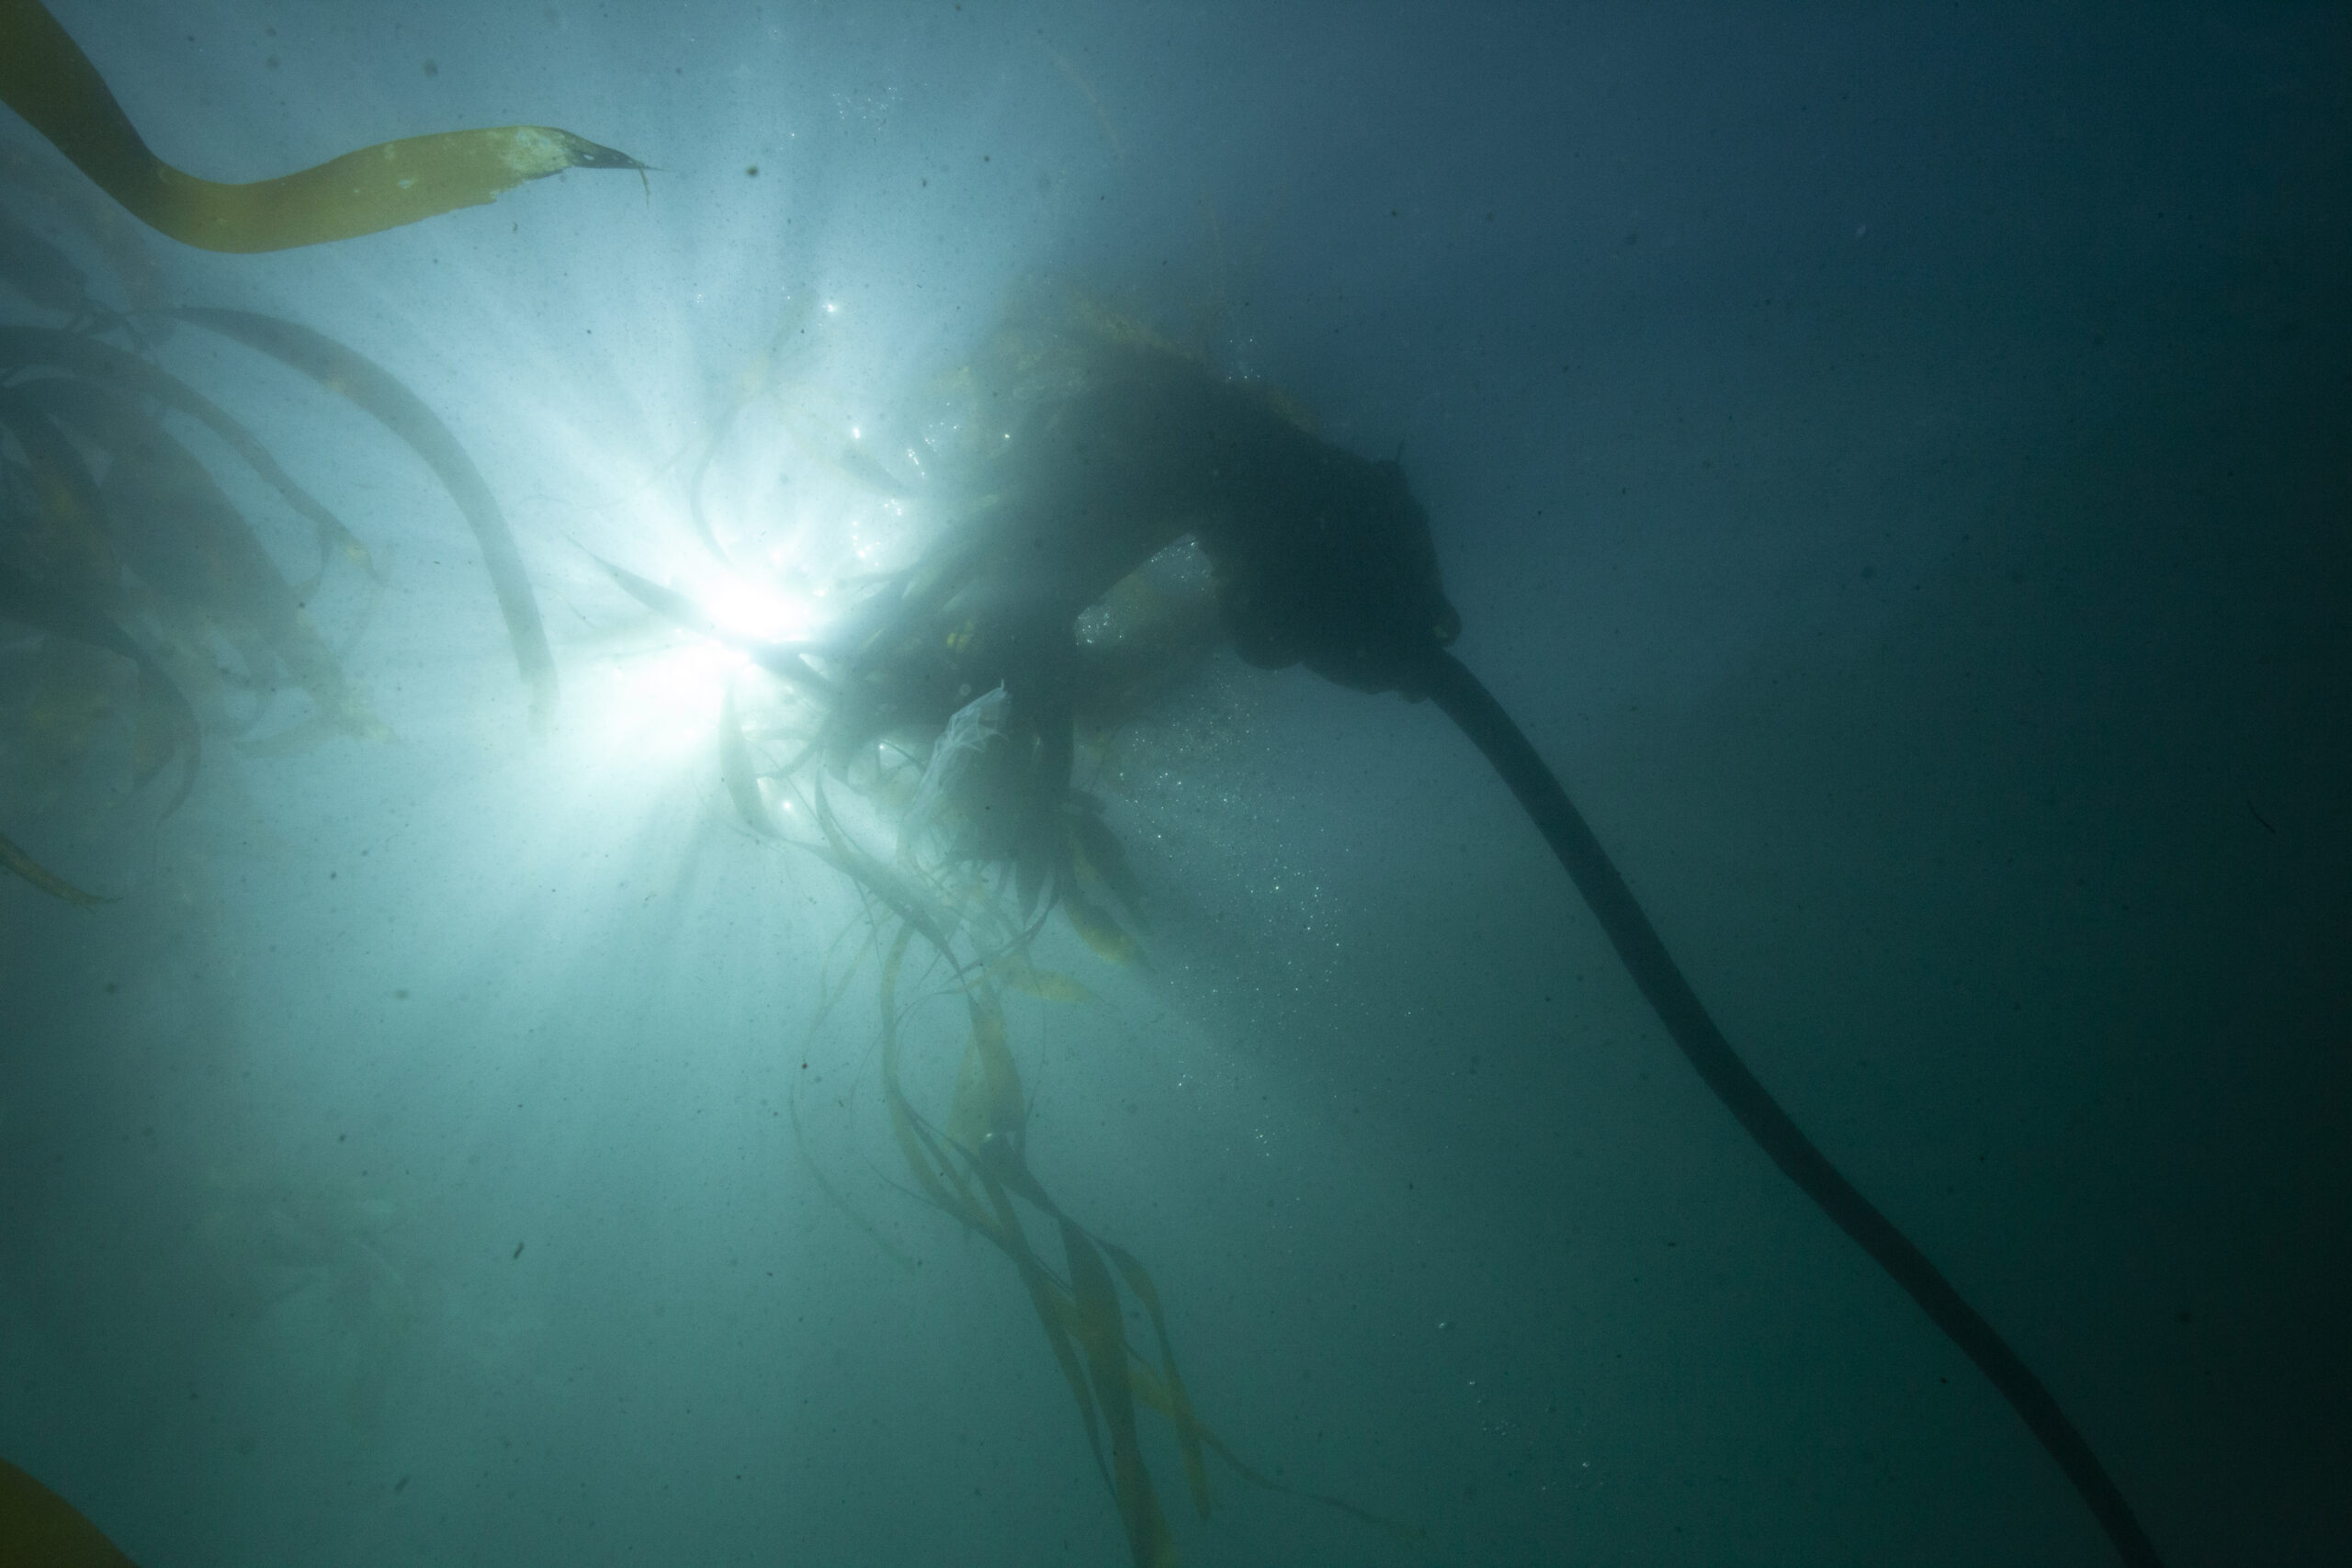 Image of single bull kelp taken from below. The sun is shining through the partially visible water from above.